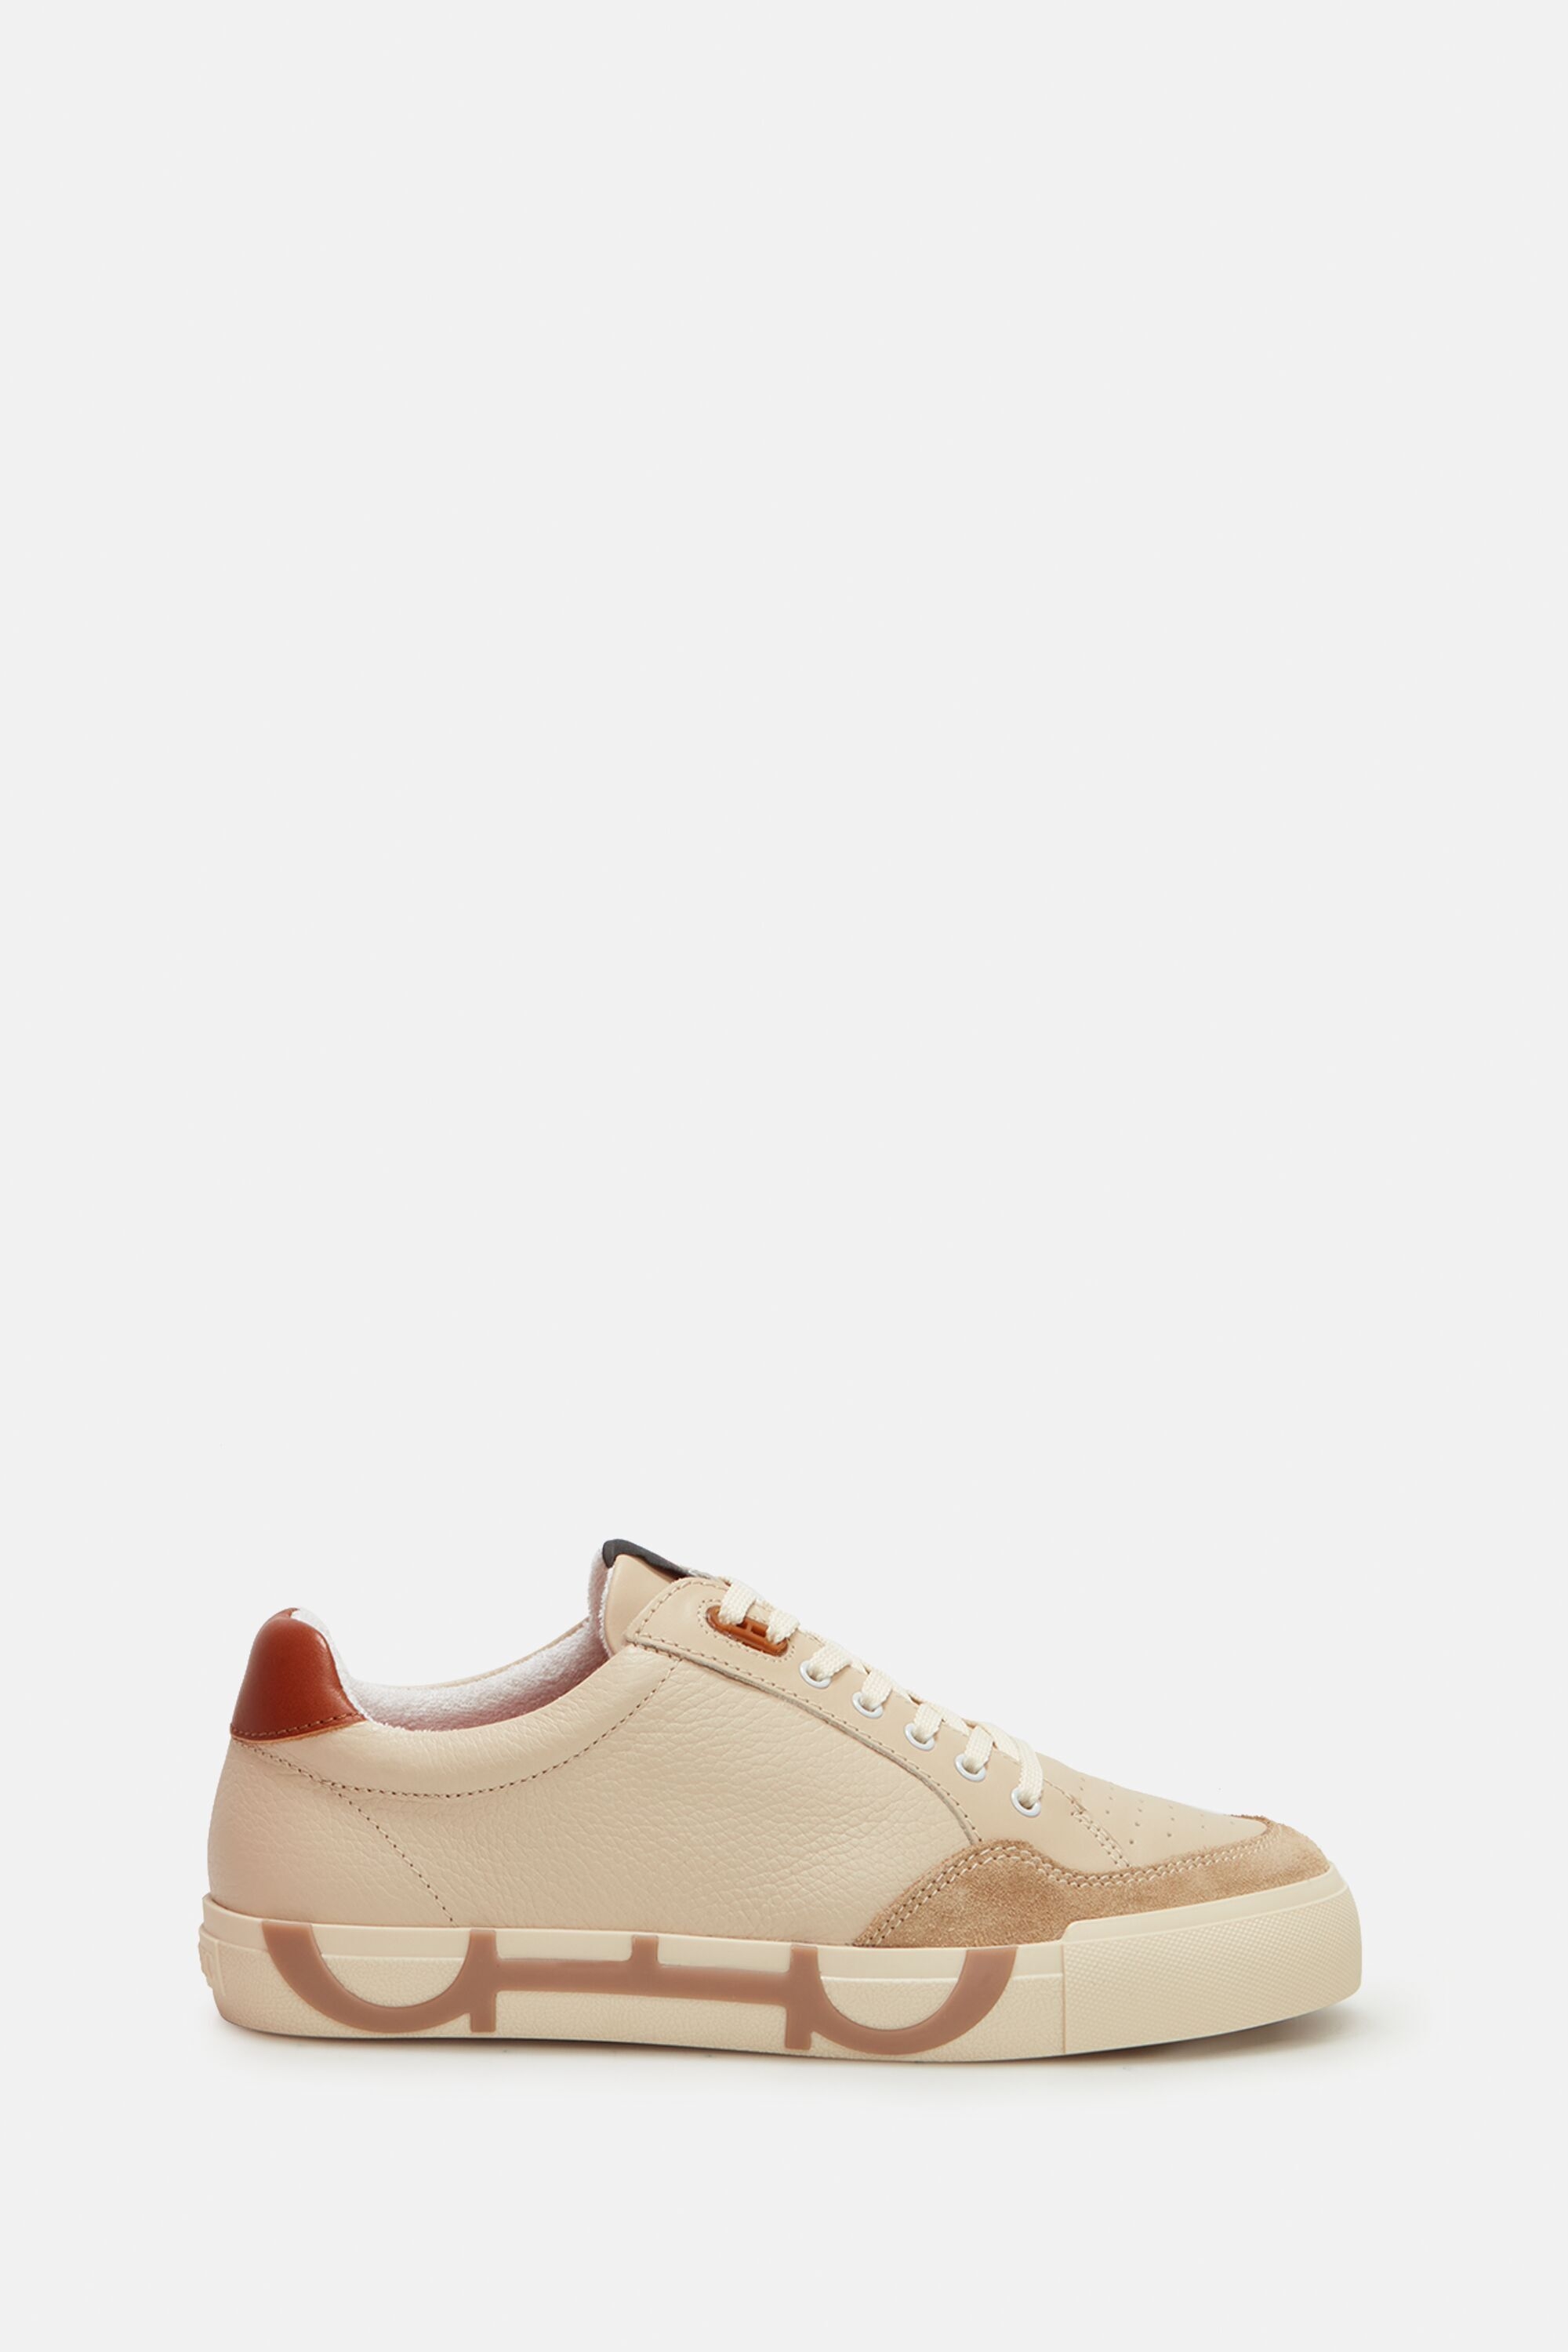 Doma Insignia leather sneakers